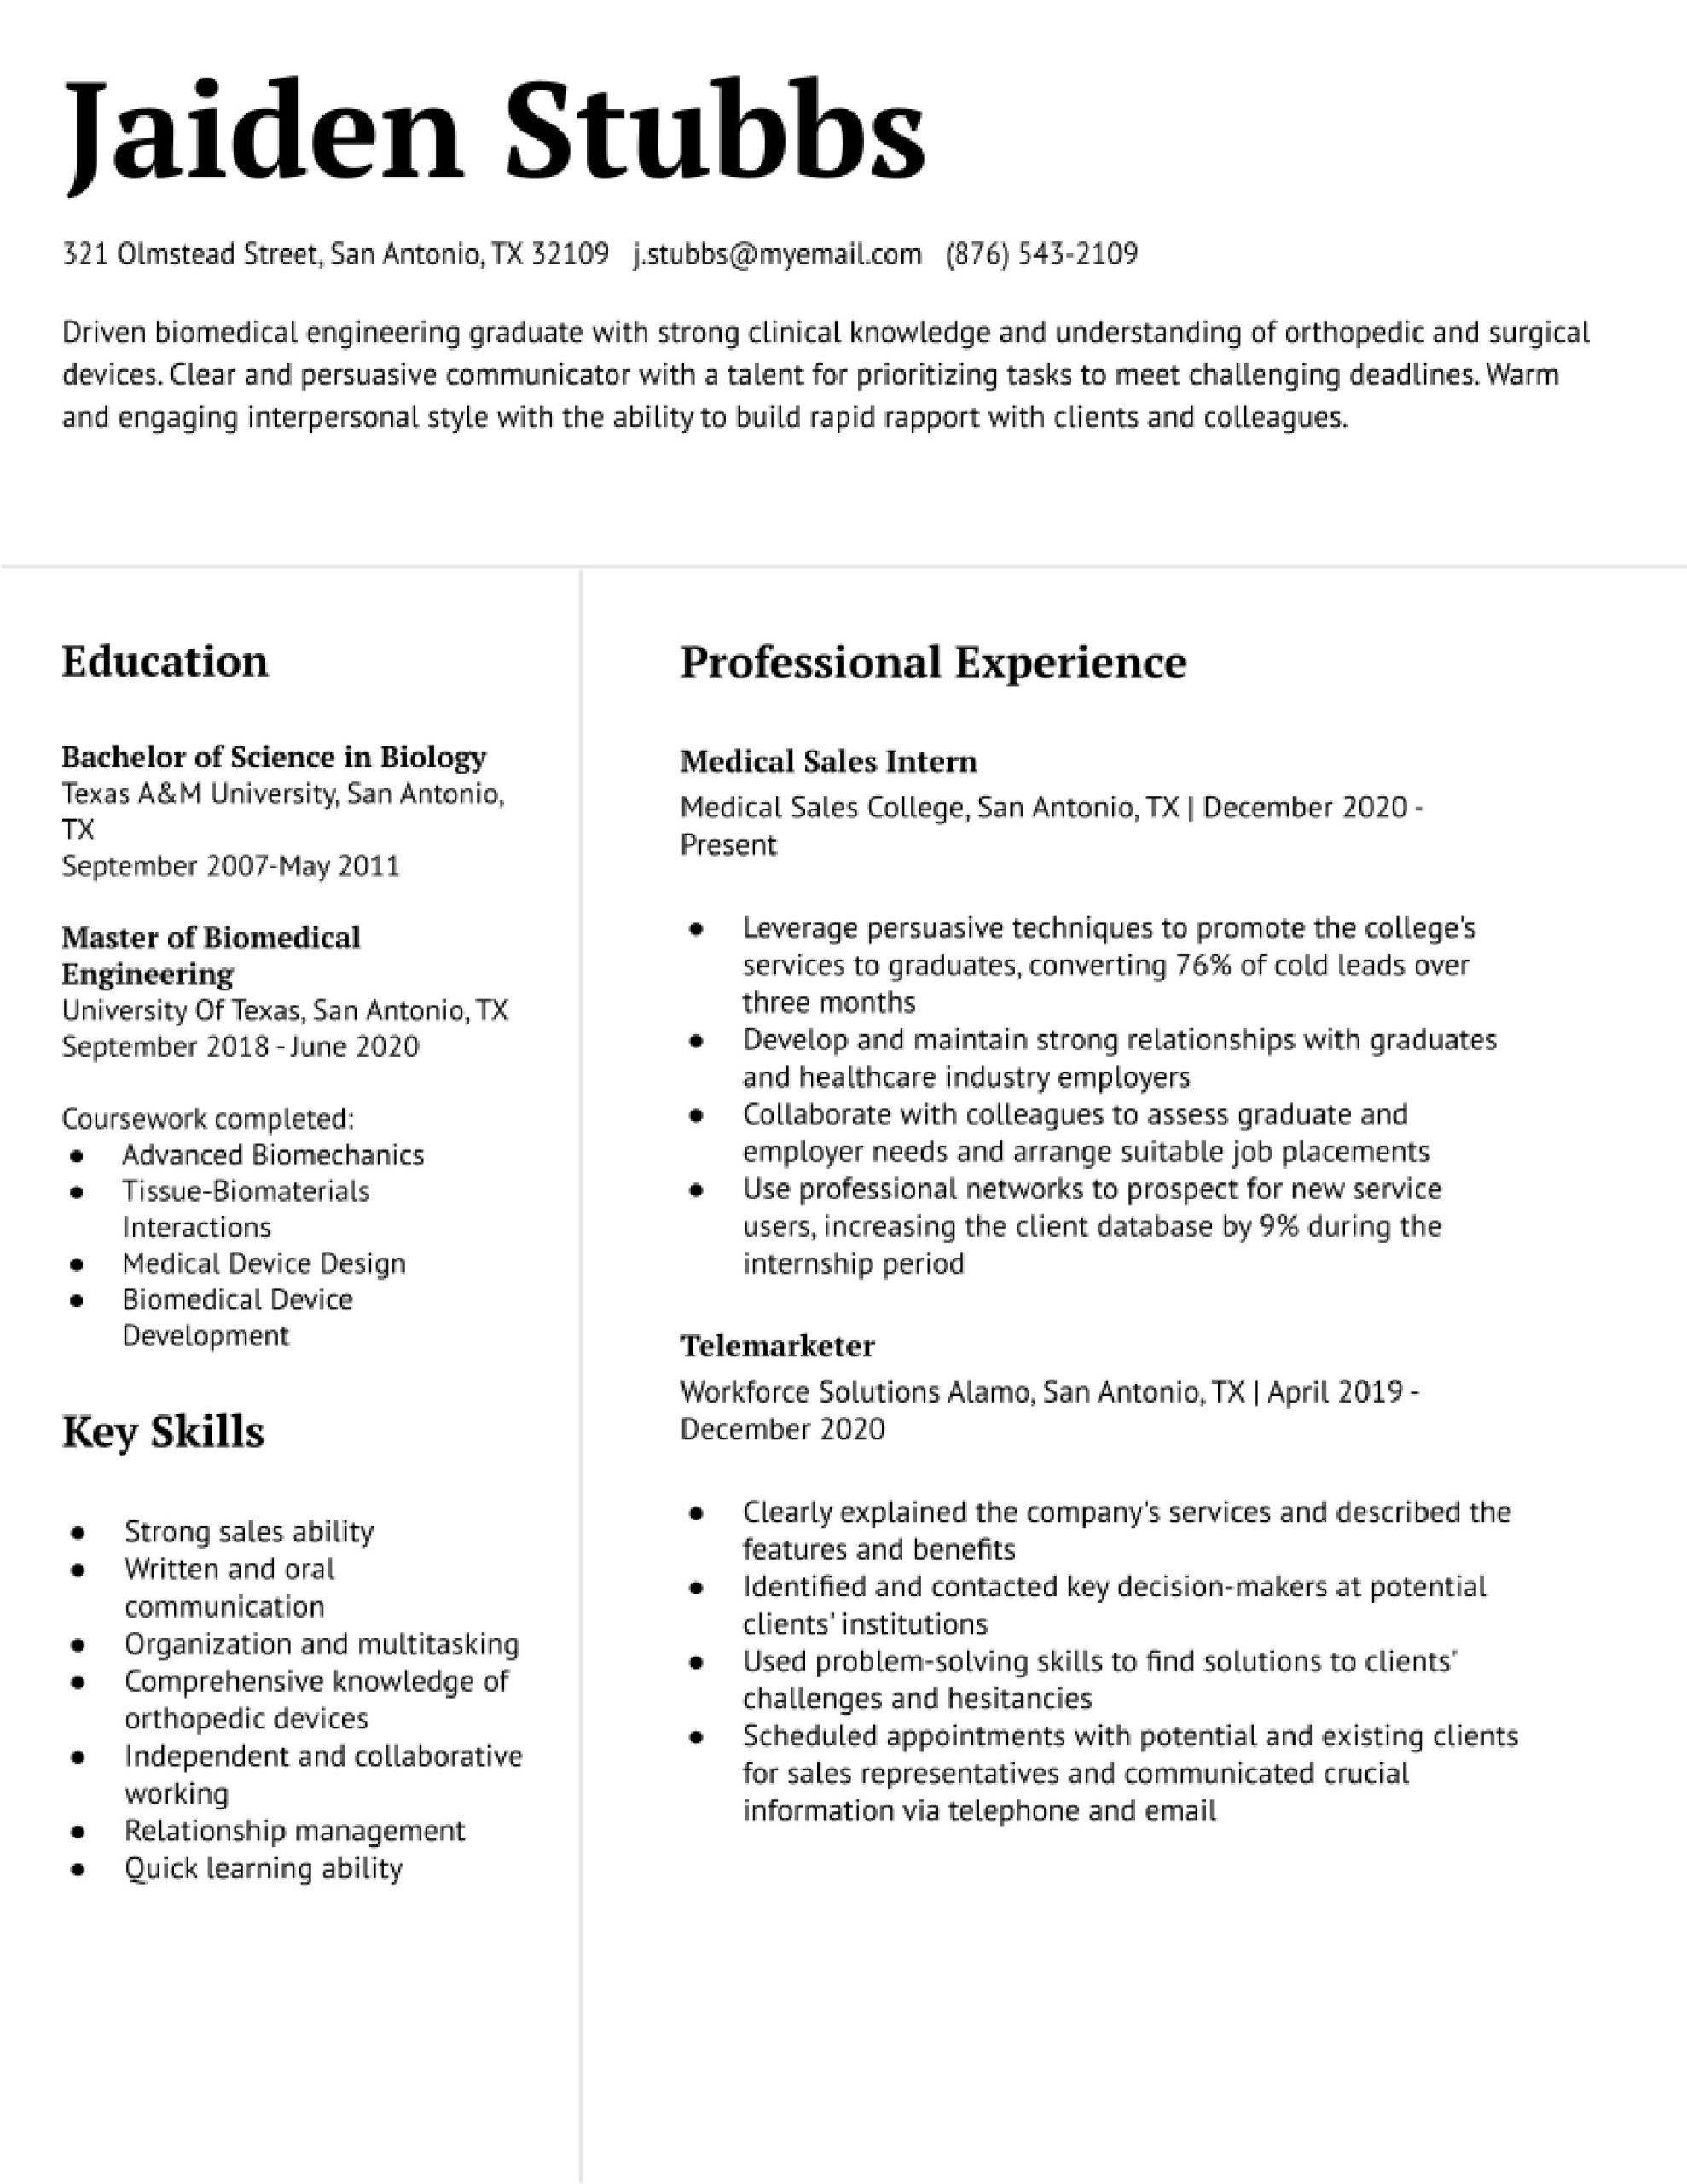 Sample Resume Objective Statements for Entry Level Entry-level Medical Sales Representative Resume Examples In 2022 …